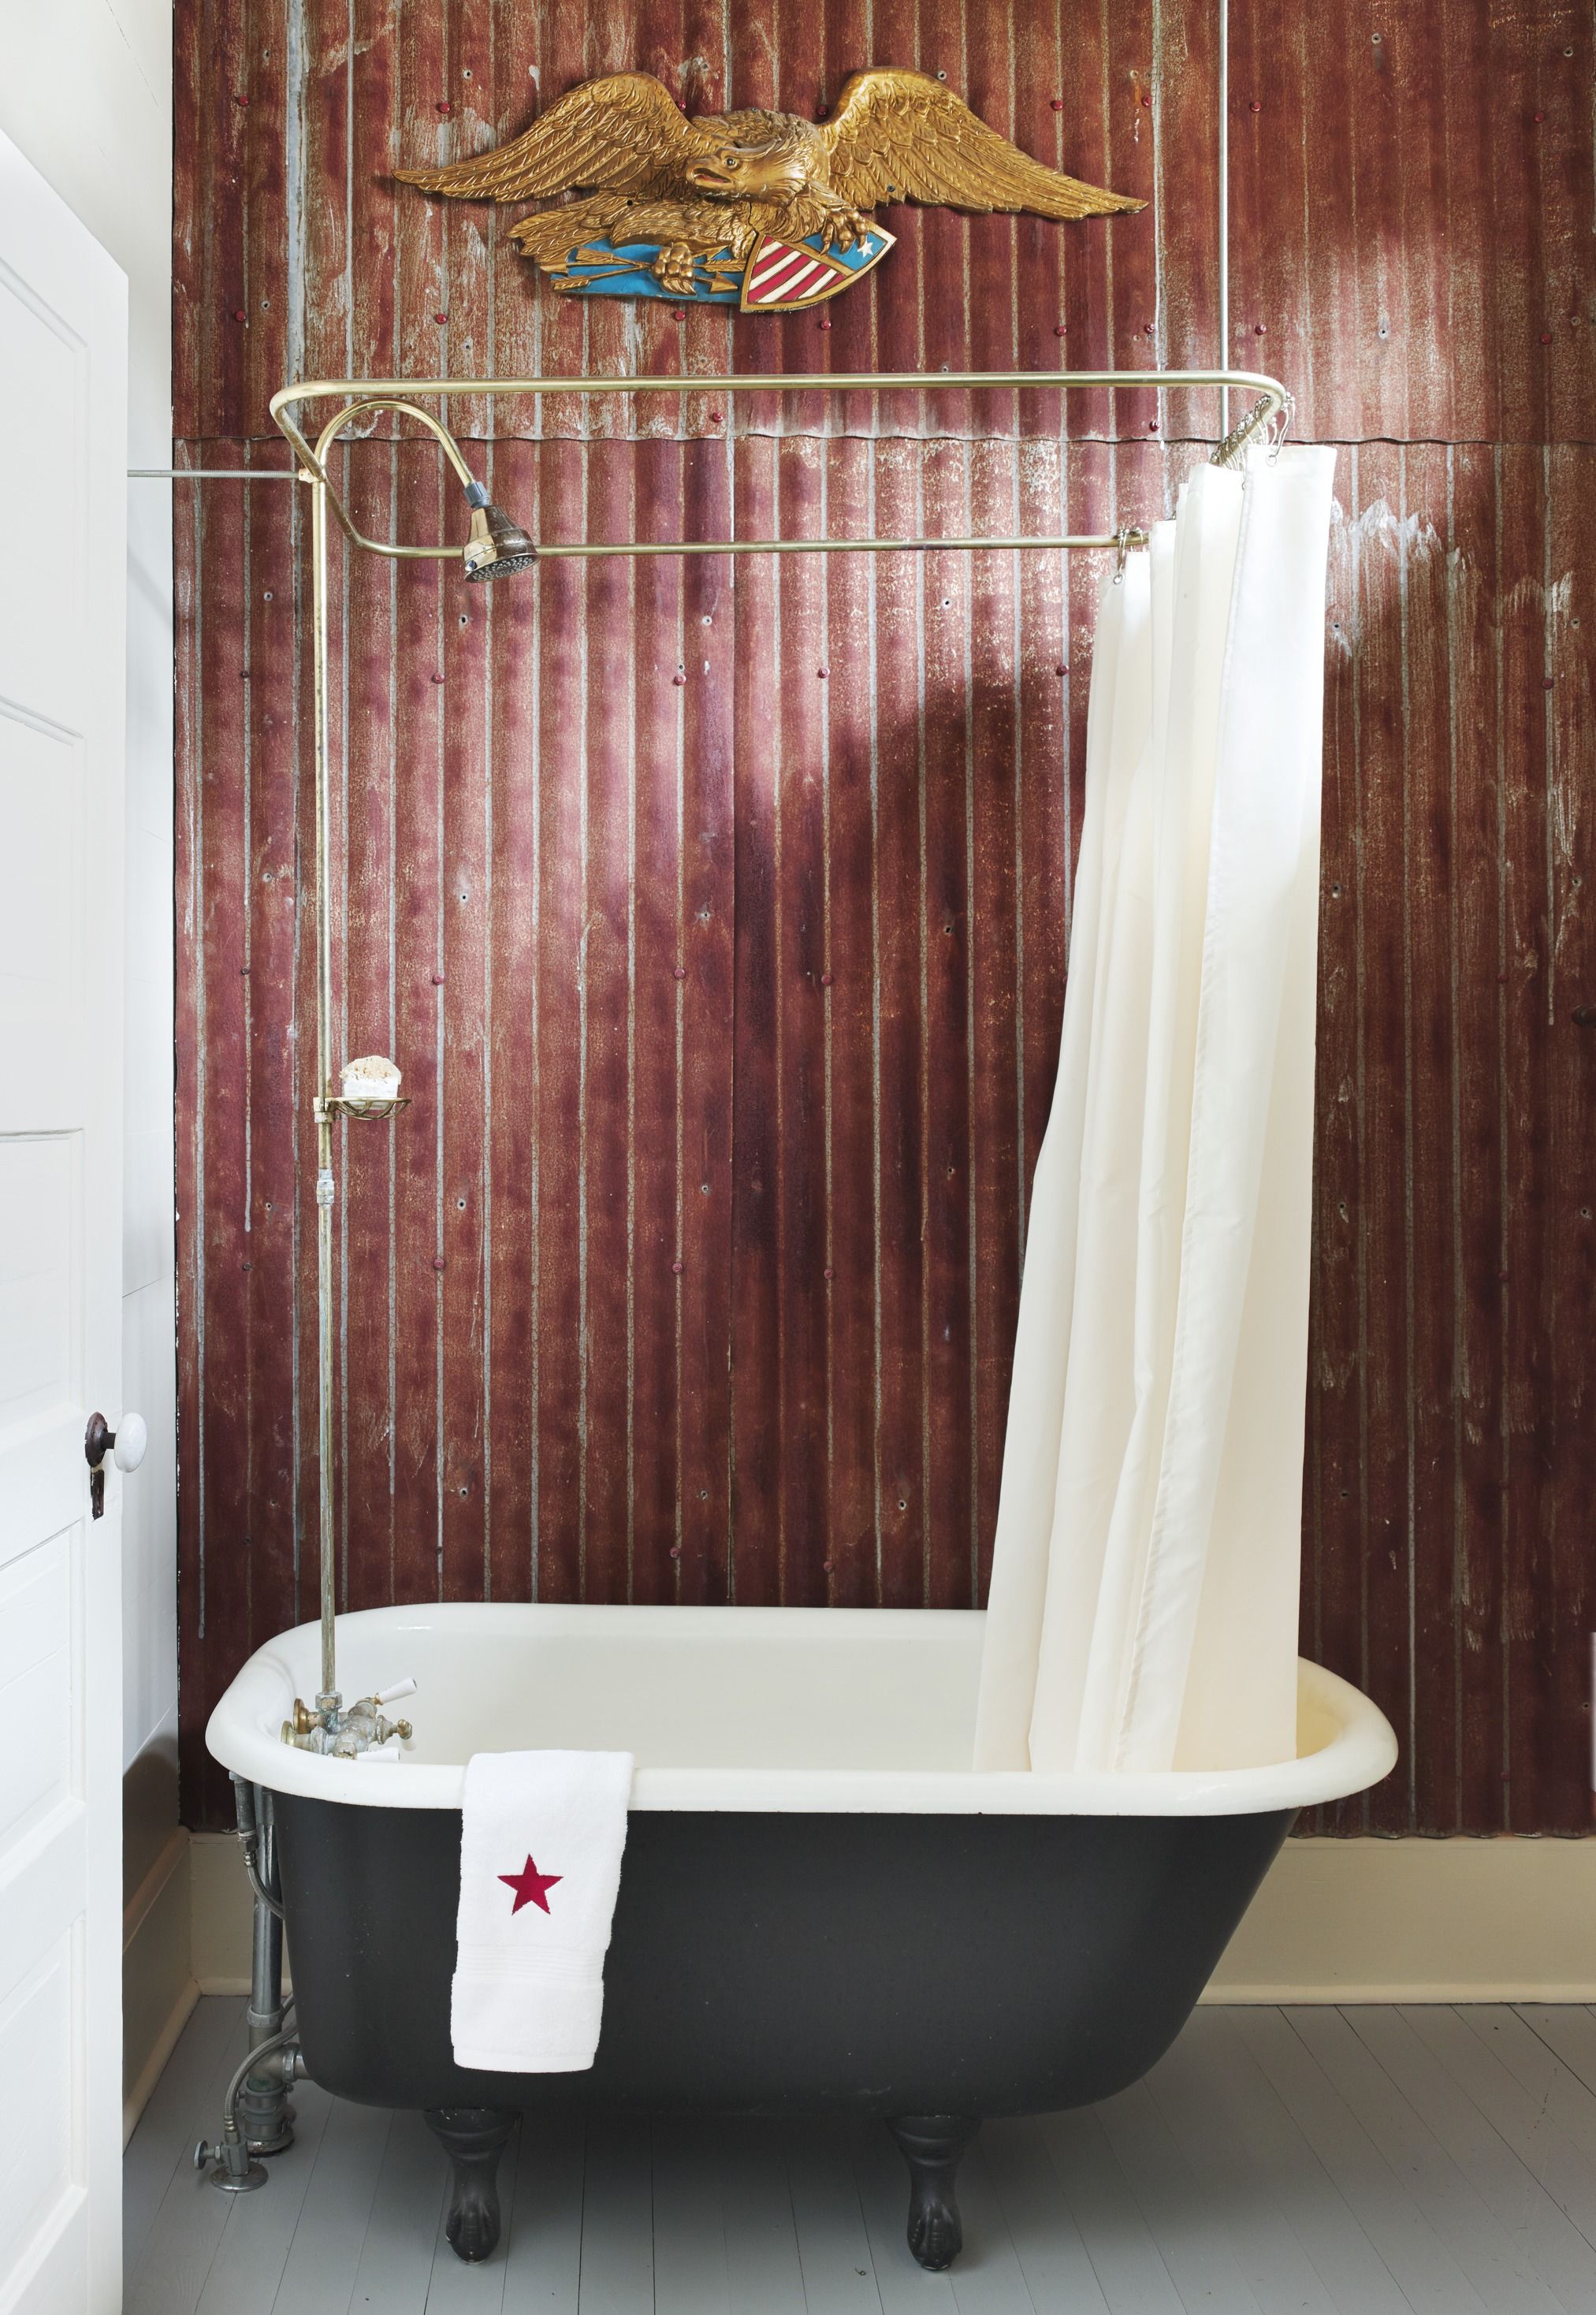 Clawfoot Tub Ideas For Your Bathroom, How To Hang A Shower Curtain Around Clawfoot Tub